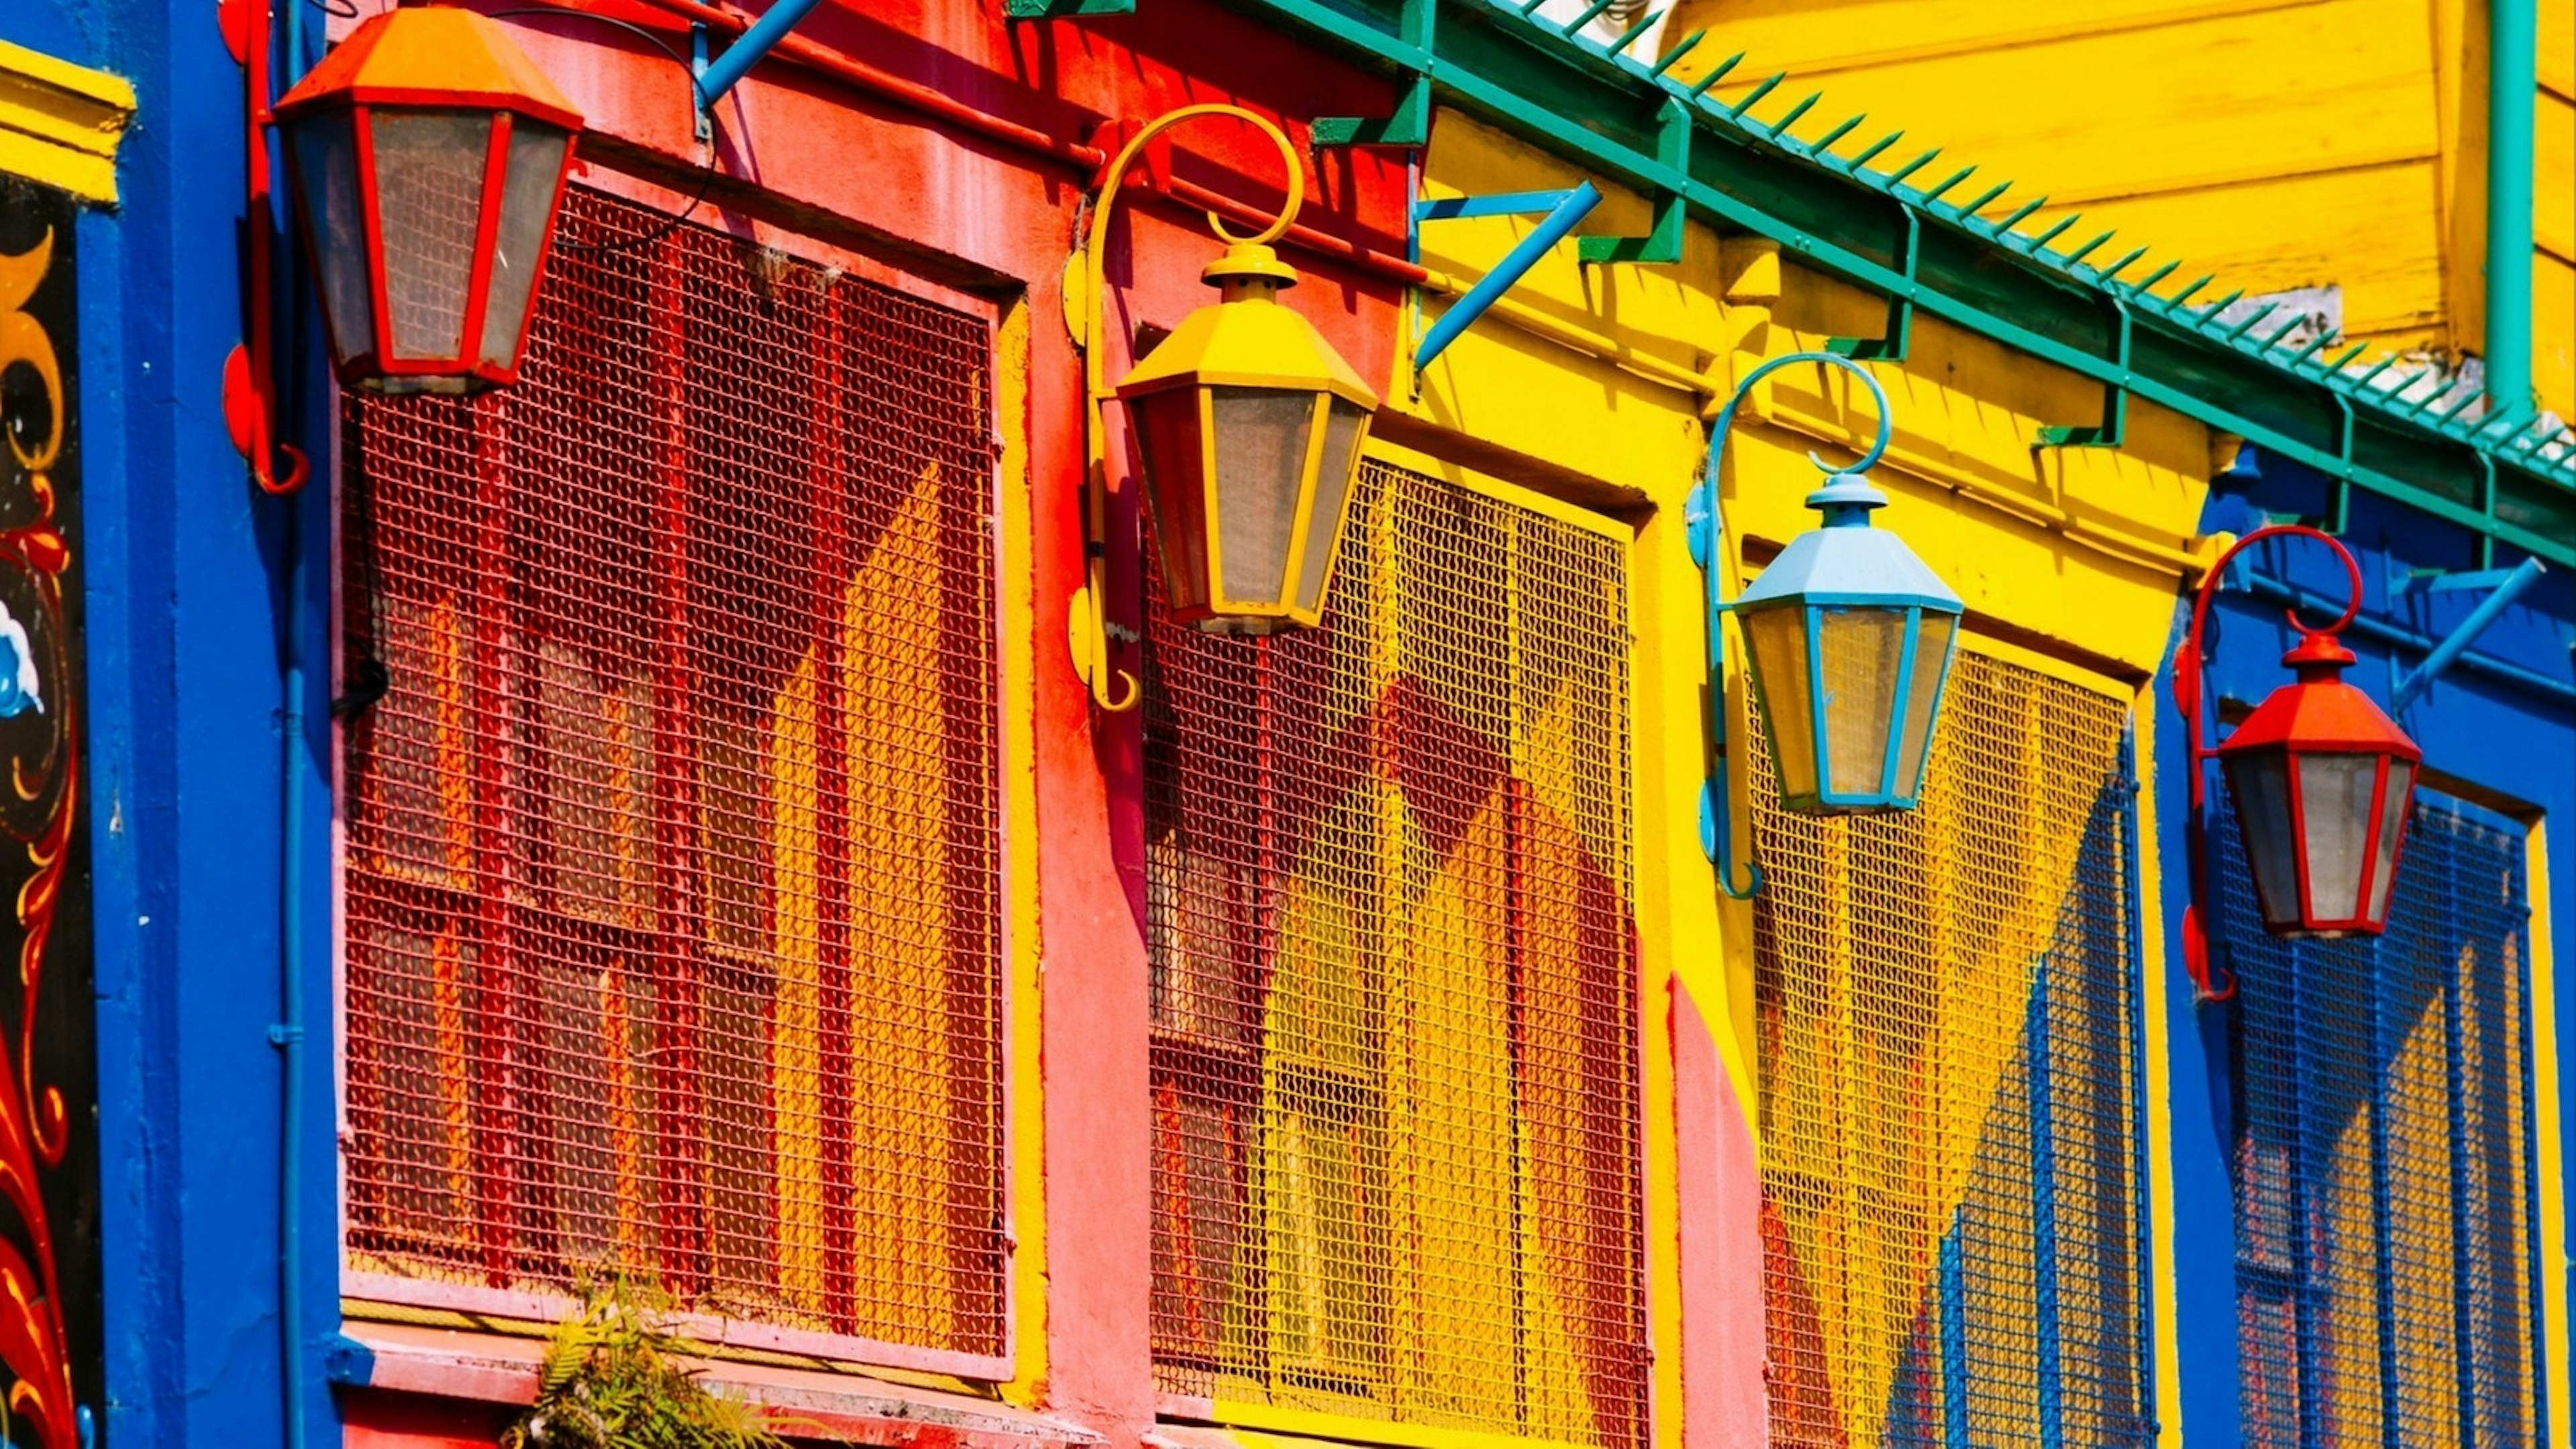 Colored building are the famous landmark of the caminito streeet